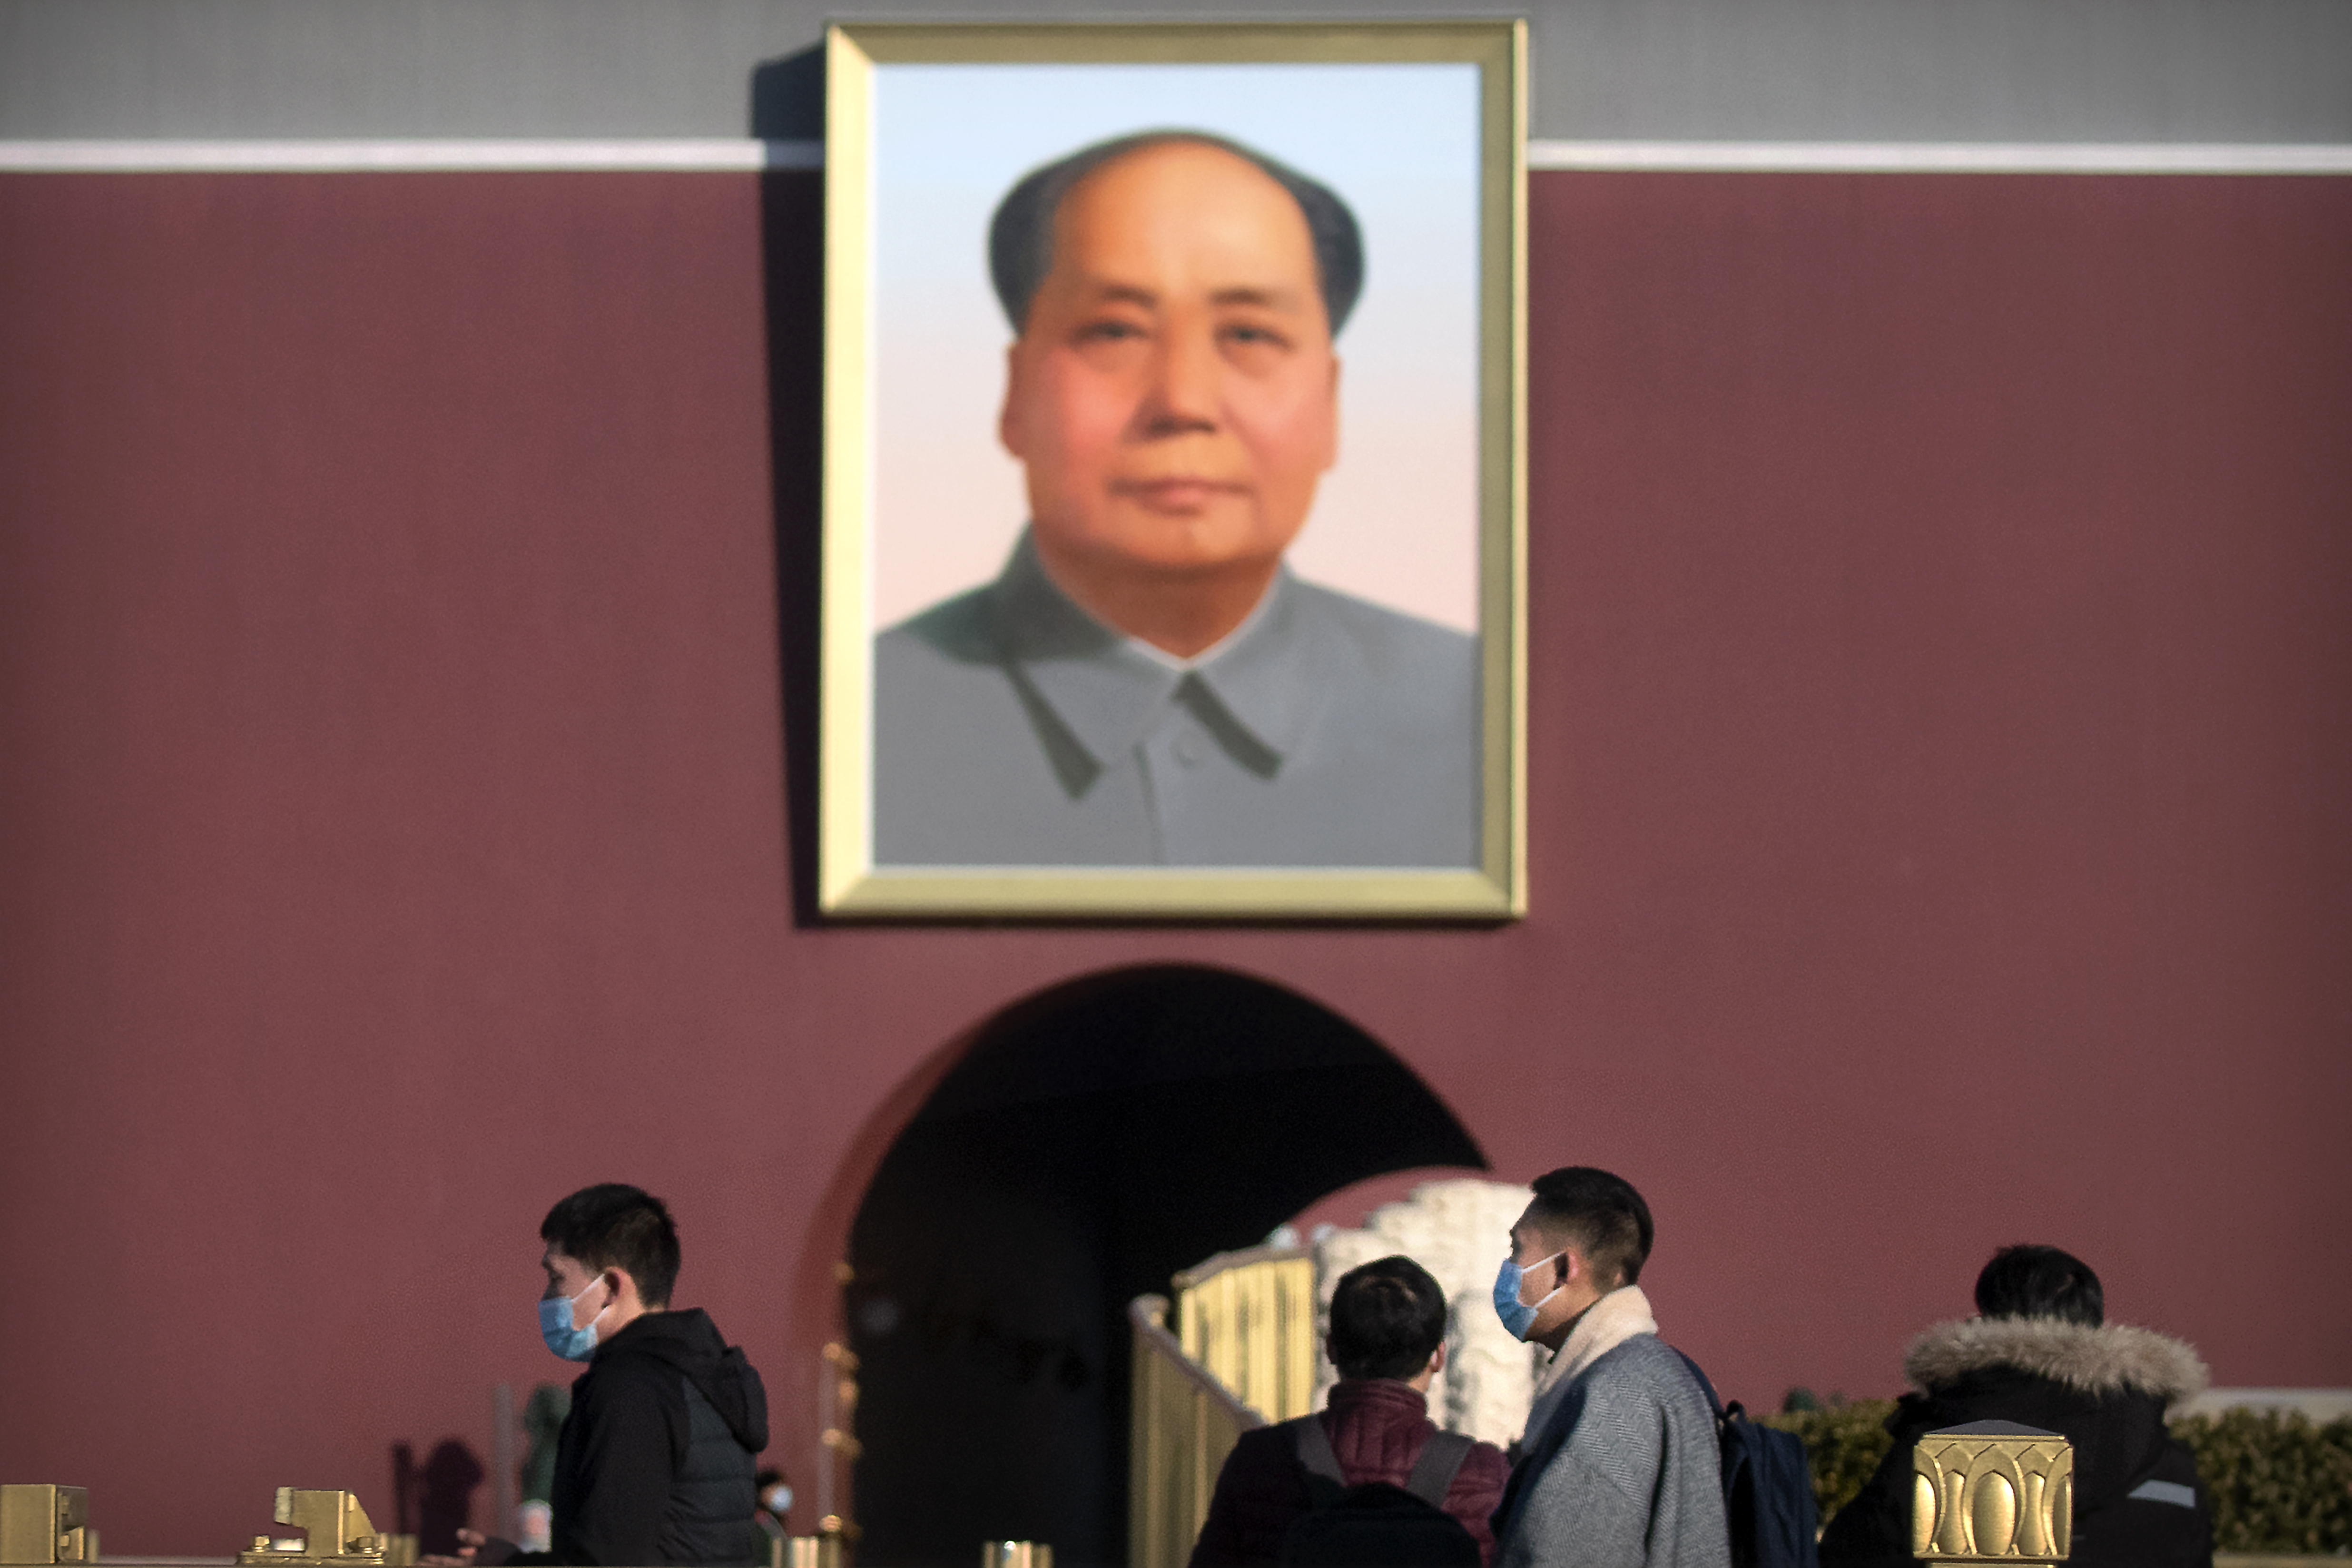 Visitors wearing face masks to protect against the spread of the coronavirus walk past the portrait of Chinese leader Mao Zedong on Tiananmen Gate near Tiananmen Square in Beijing, Saturday, Jan. 9, 2021. COVID vaccine shots will be free in China, where more than 9 million doses have been give to date, health officials in Beijing said Saturday. (AP Photo/Mark Schiefelbein)